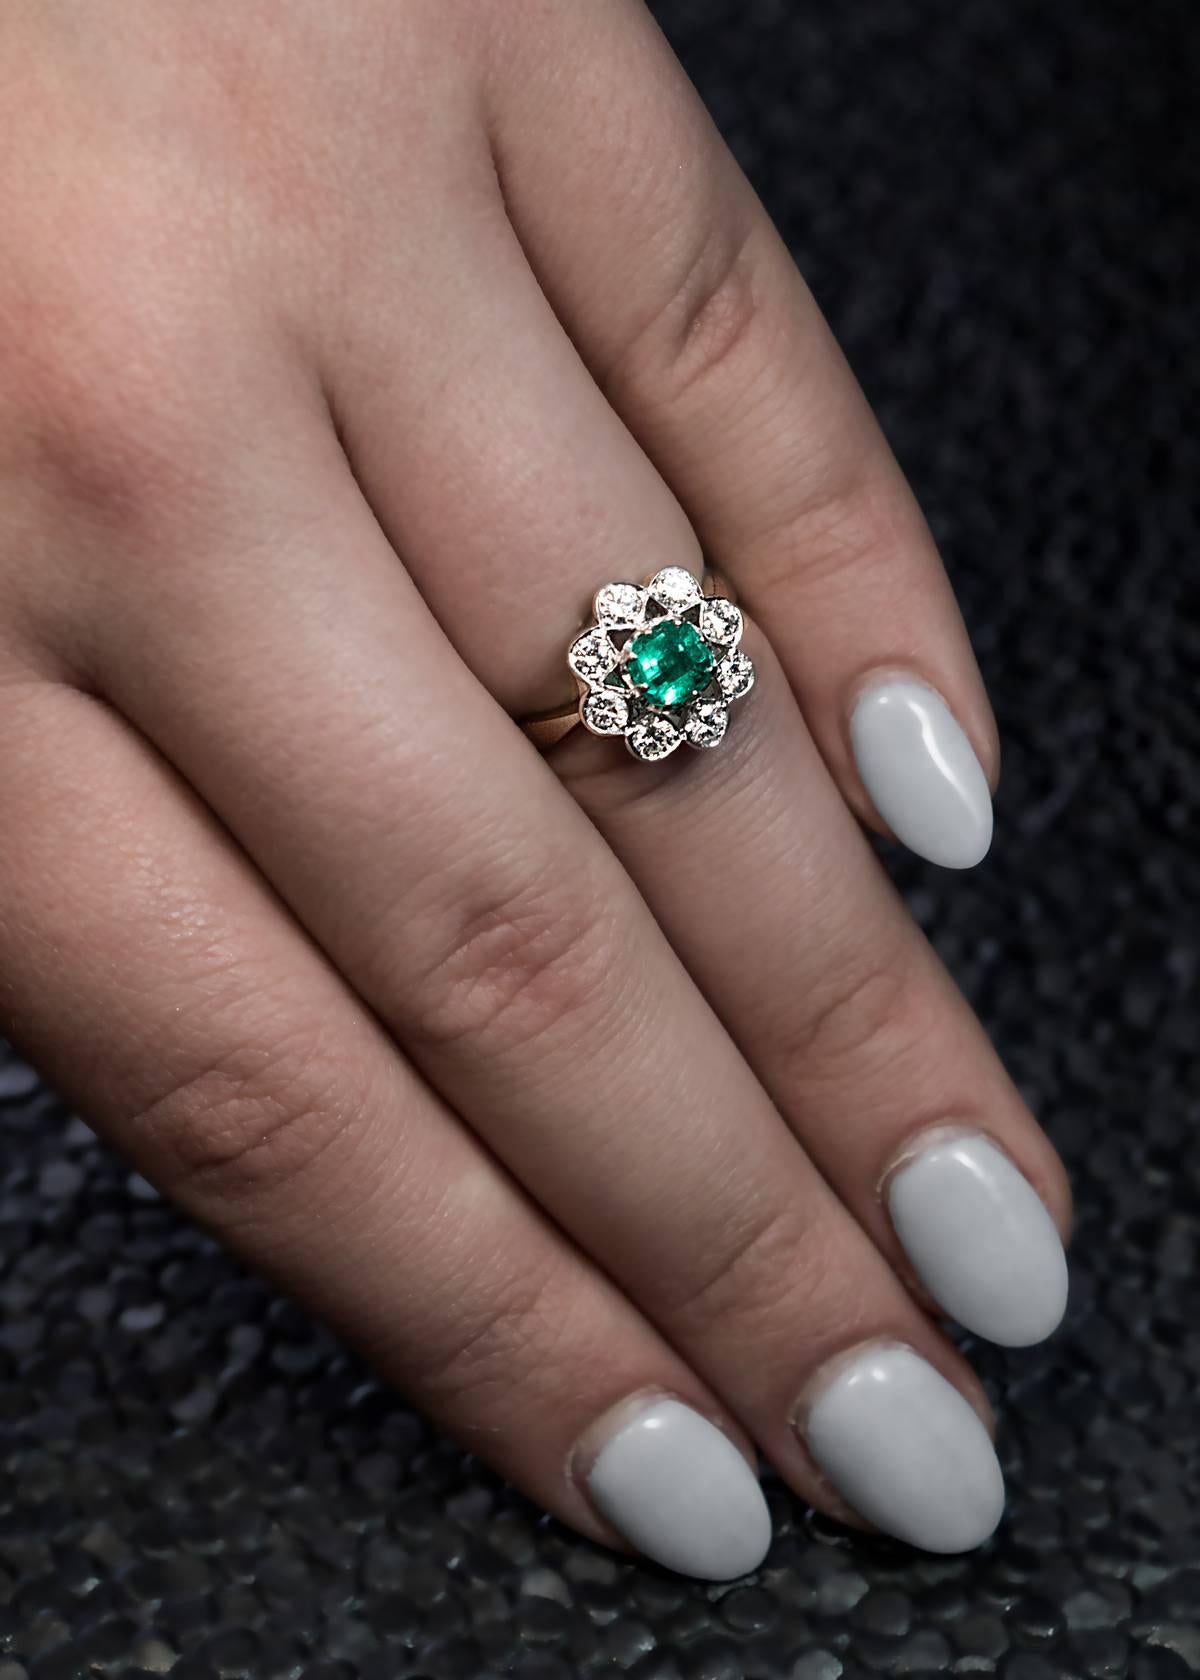 Austrian, Vienna, circa 1960s
A mid-century finely crafted 14K white gold openwork cluster ring is centered with a square emerald cut emerald (measuring 5.23 x 5.13 x 3.8 mm, approximately 0.71 ct) surrounded by brilliant cut diamonds of excellent